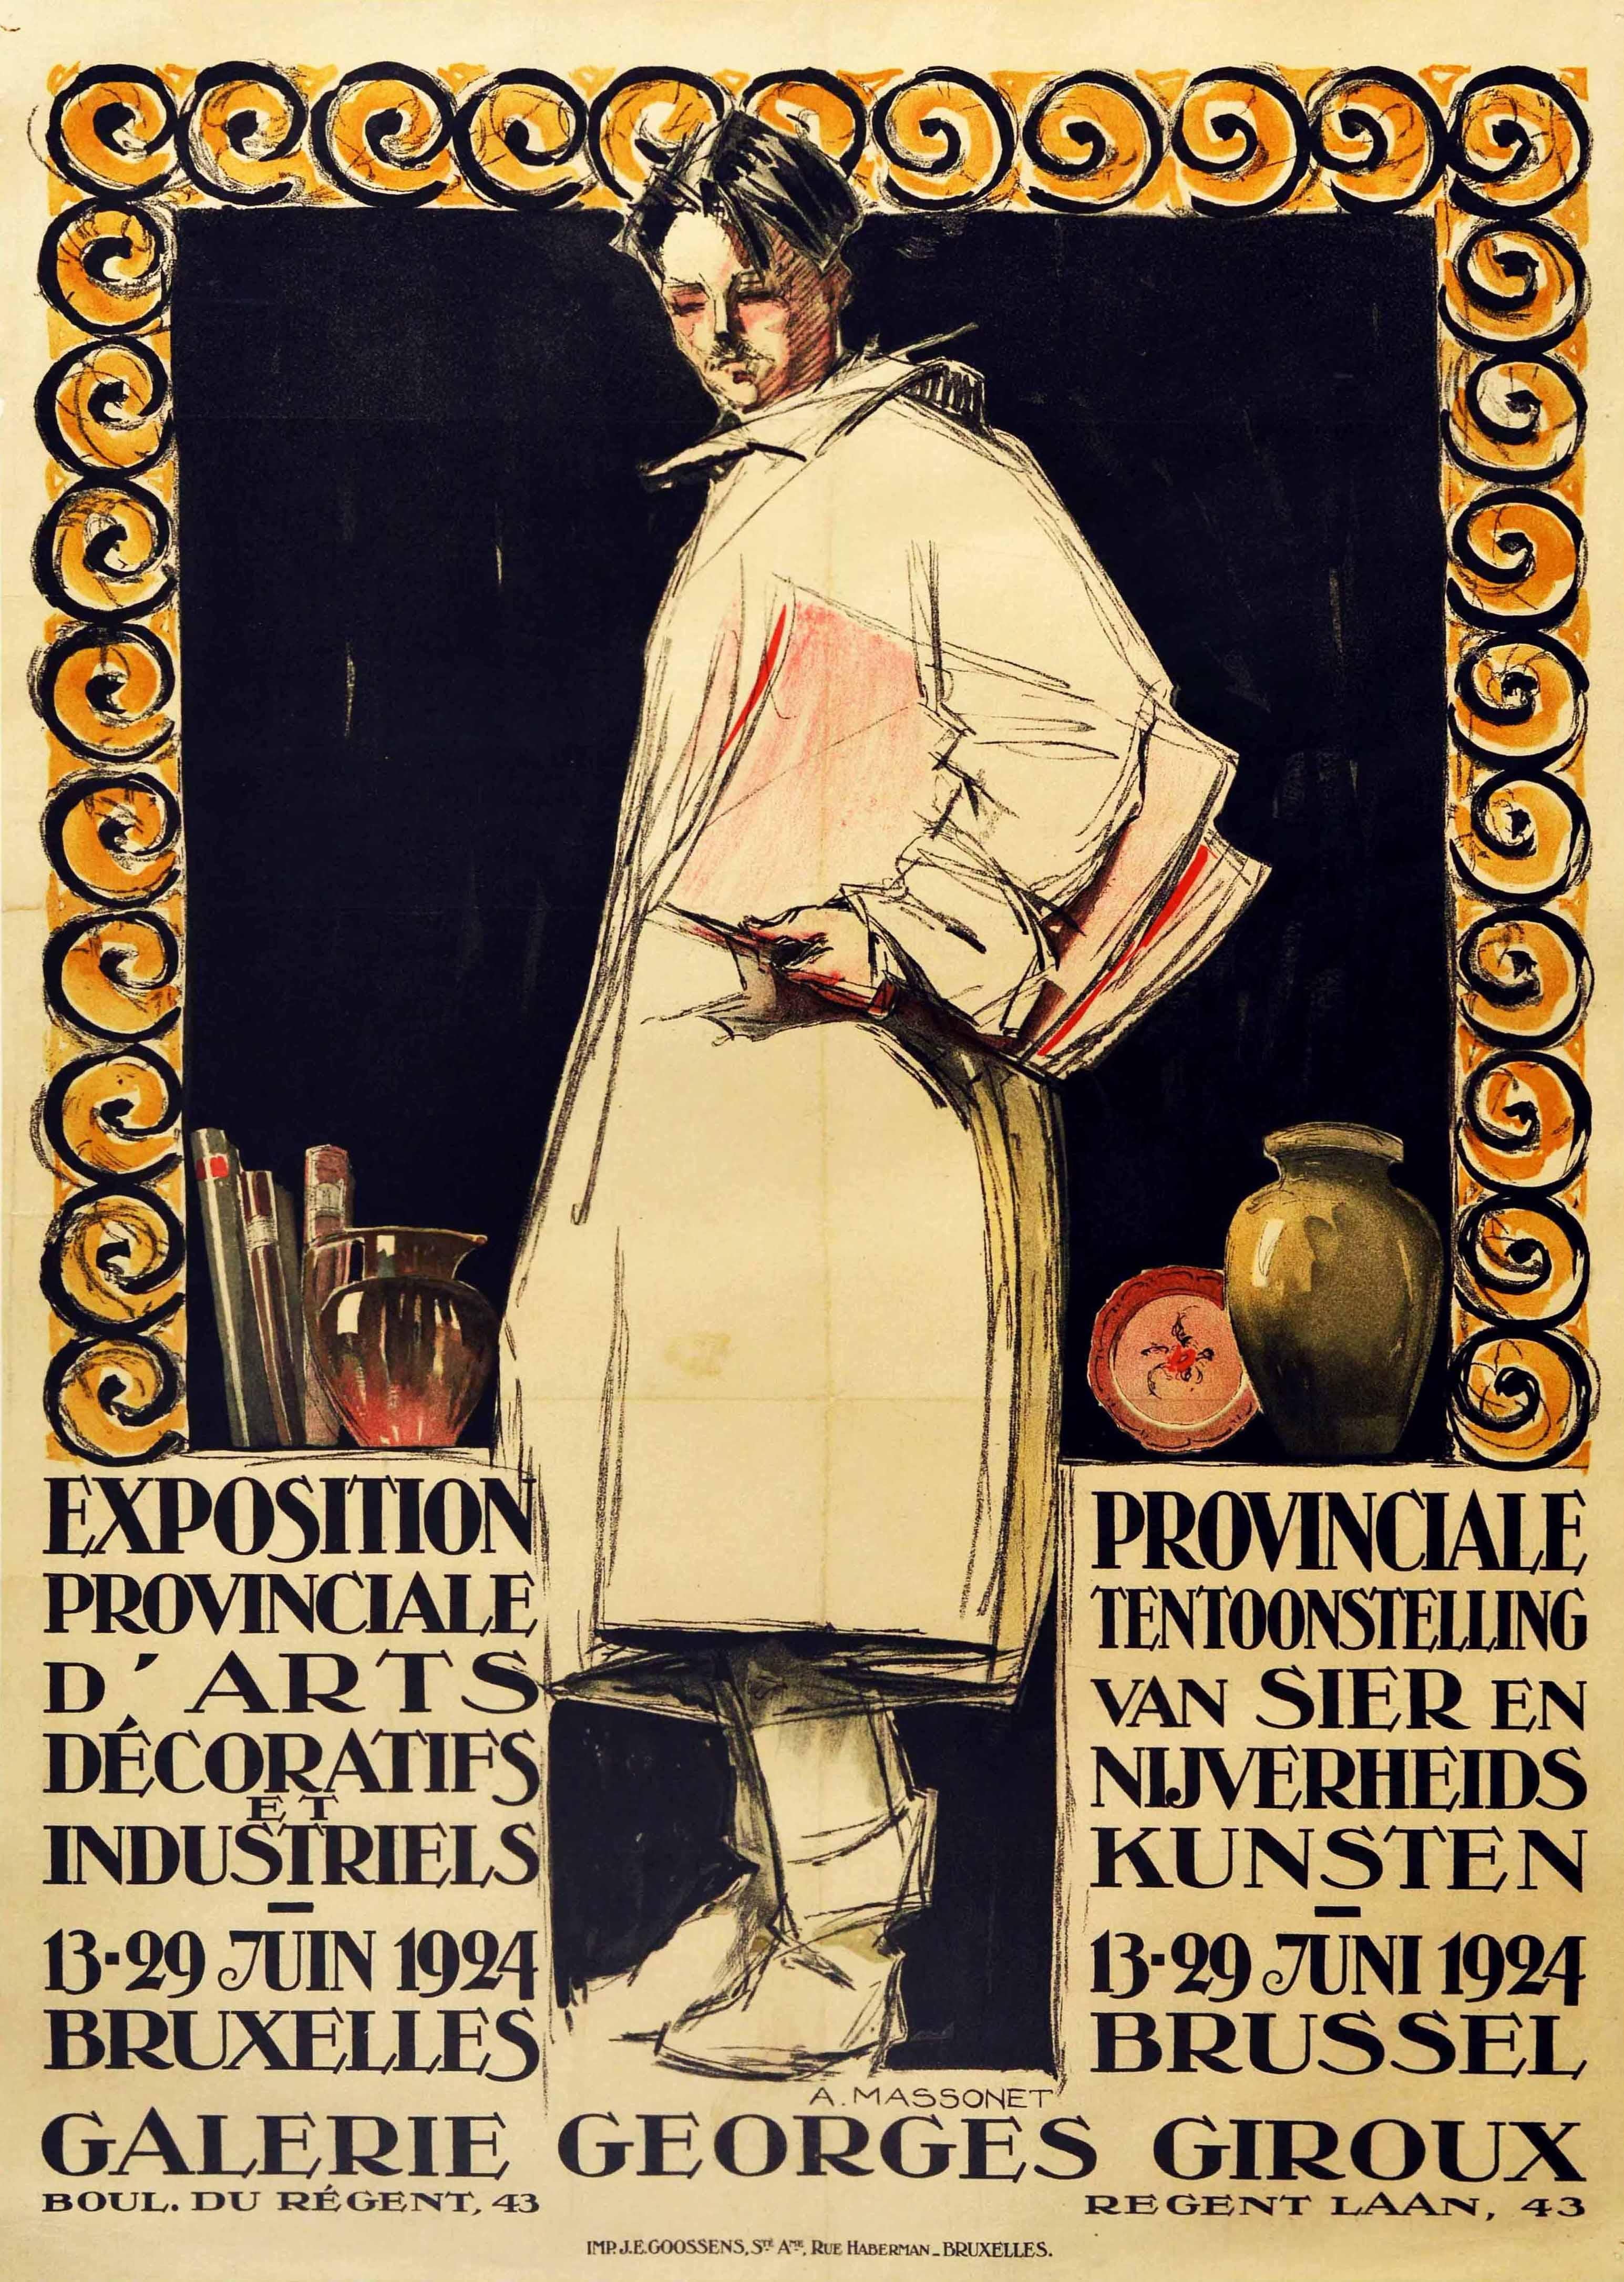 Original vintage advertising poster for a Provincial Exhibition of Decorative and Industrial Arts / Exposition Provinciale d'arts decoratifs et industriels held on 13-29 June 1924 in Brussels at the Galerie Georges Giroux featuring an illustration